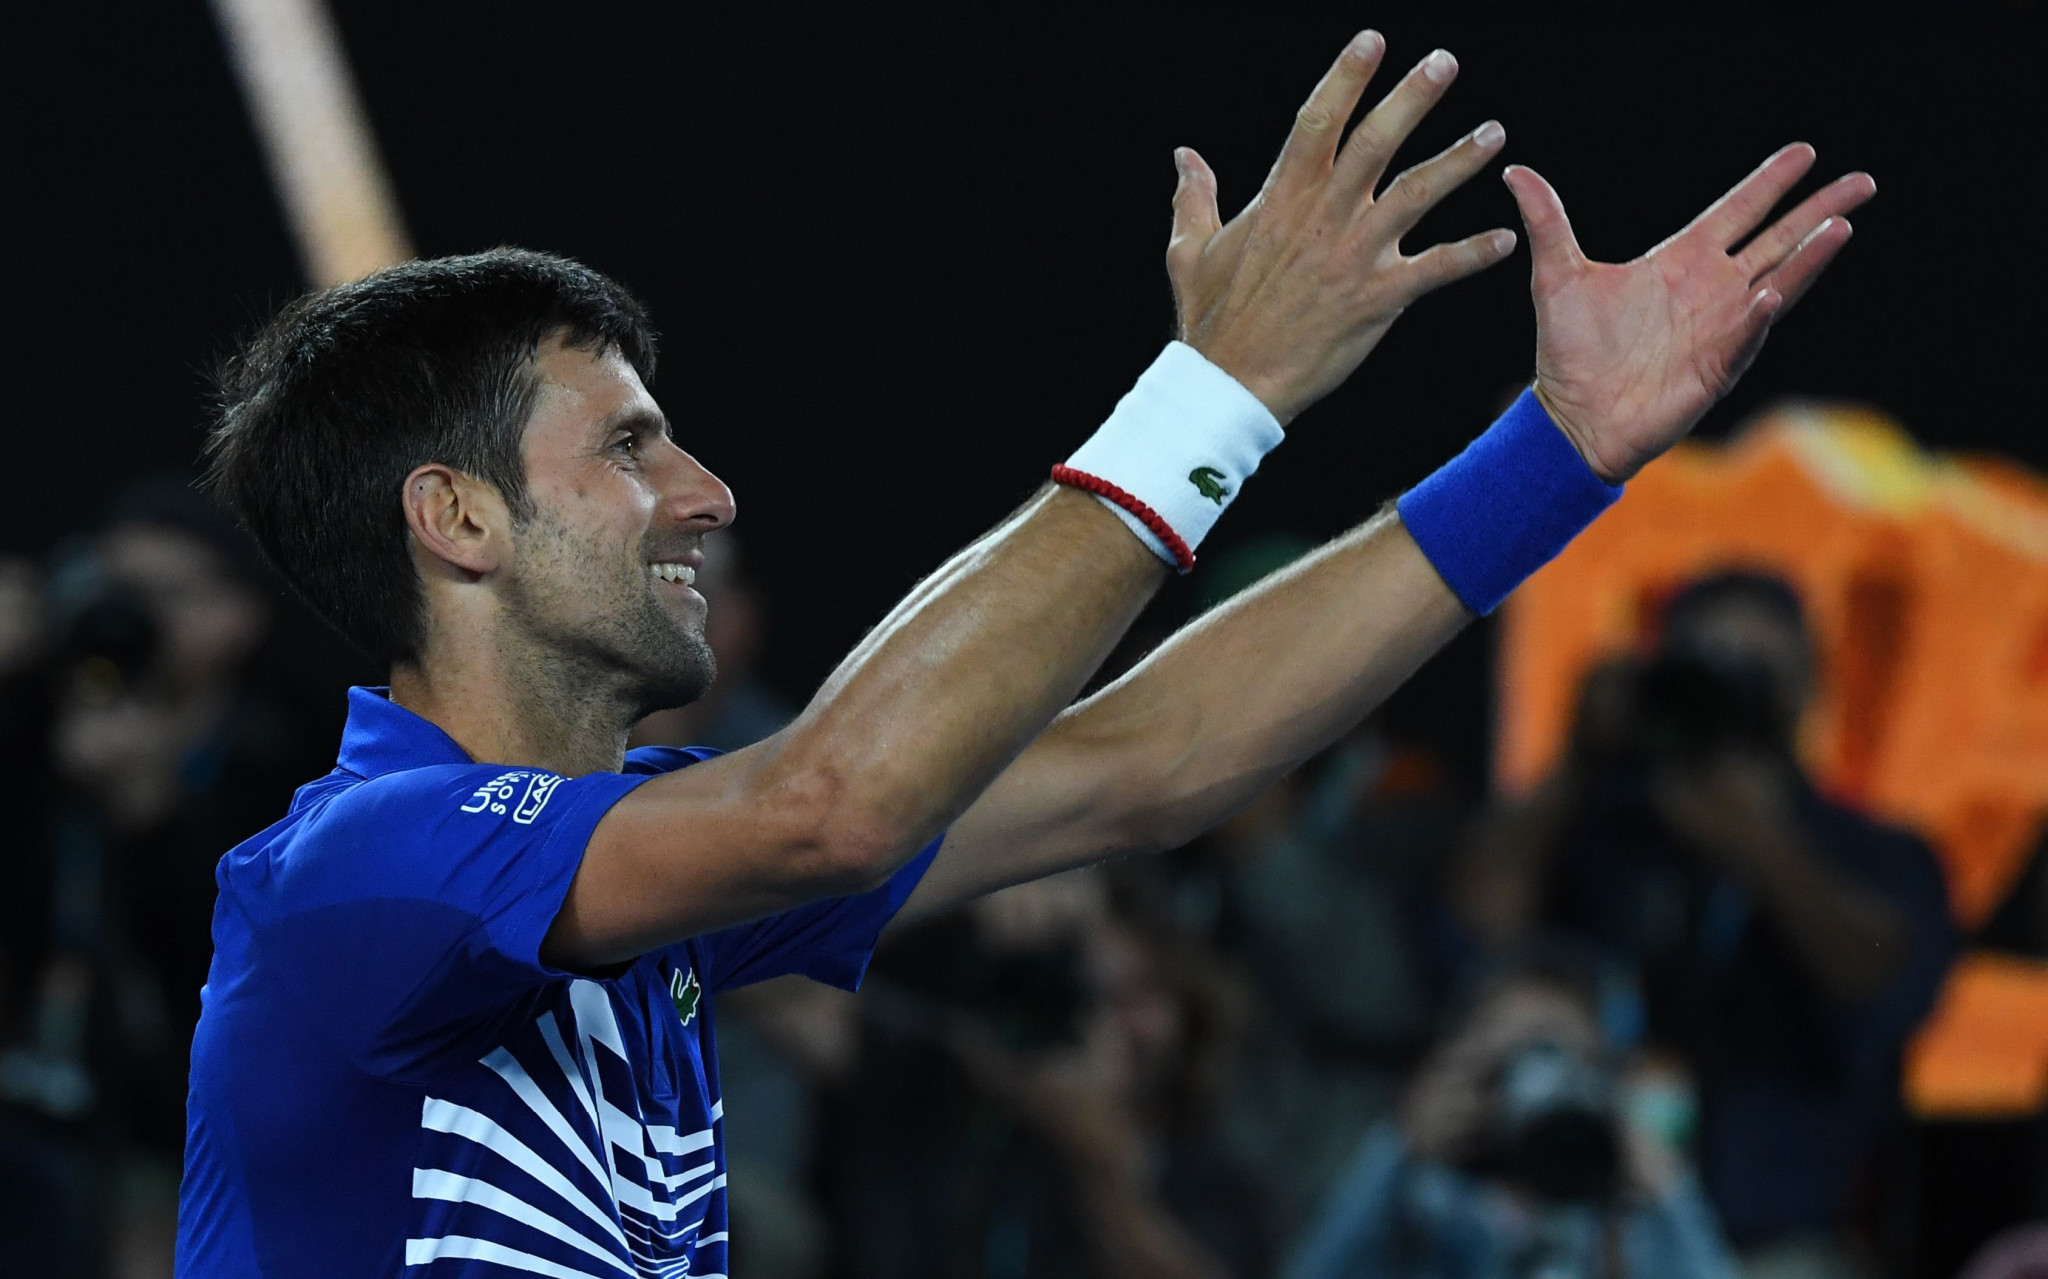 Novak Djokovic performed his trademark celebration after the victory ©Getty Images